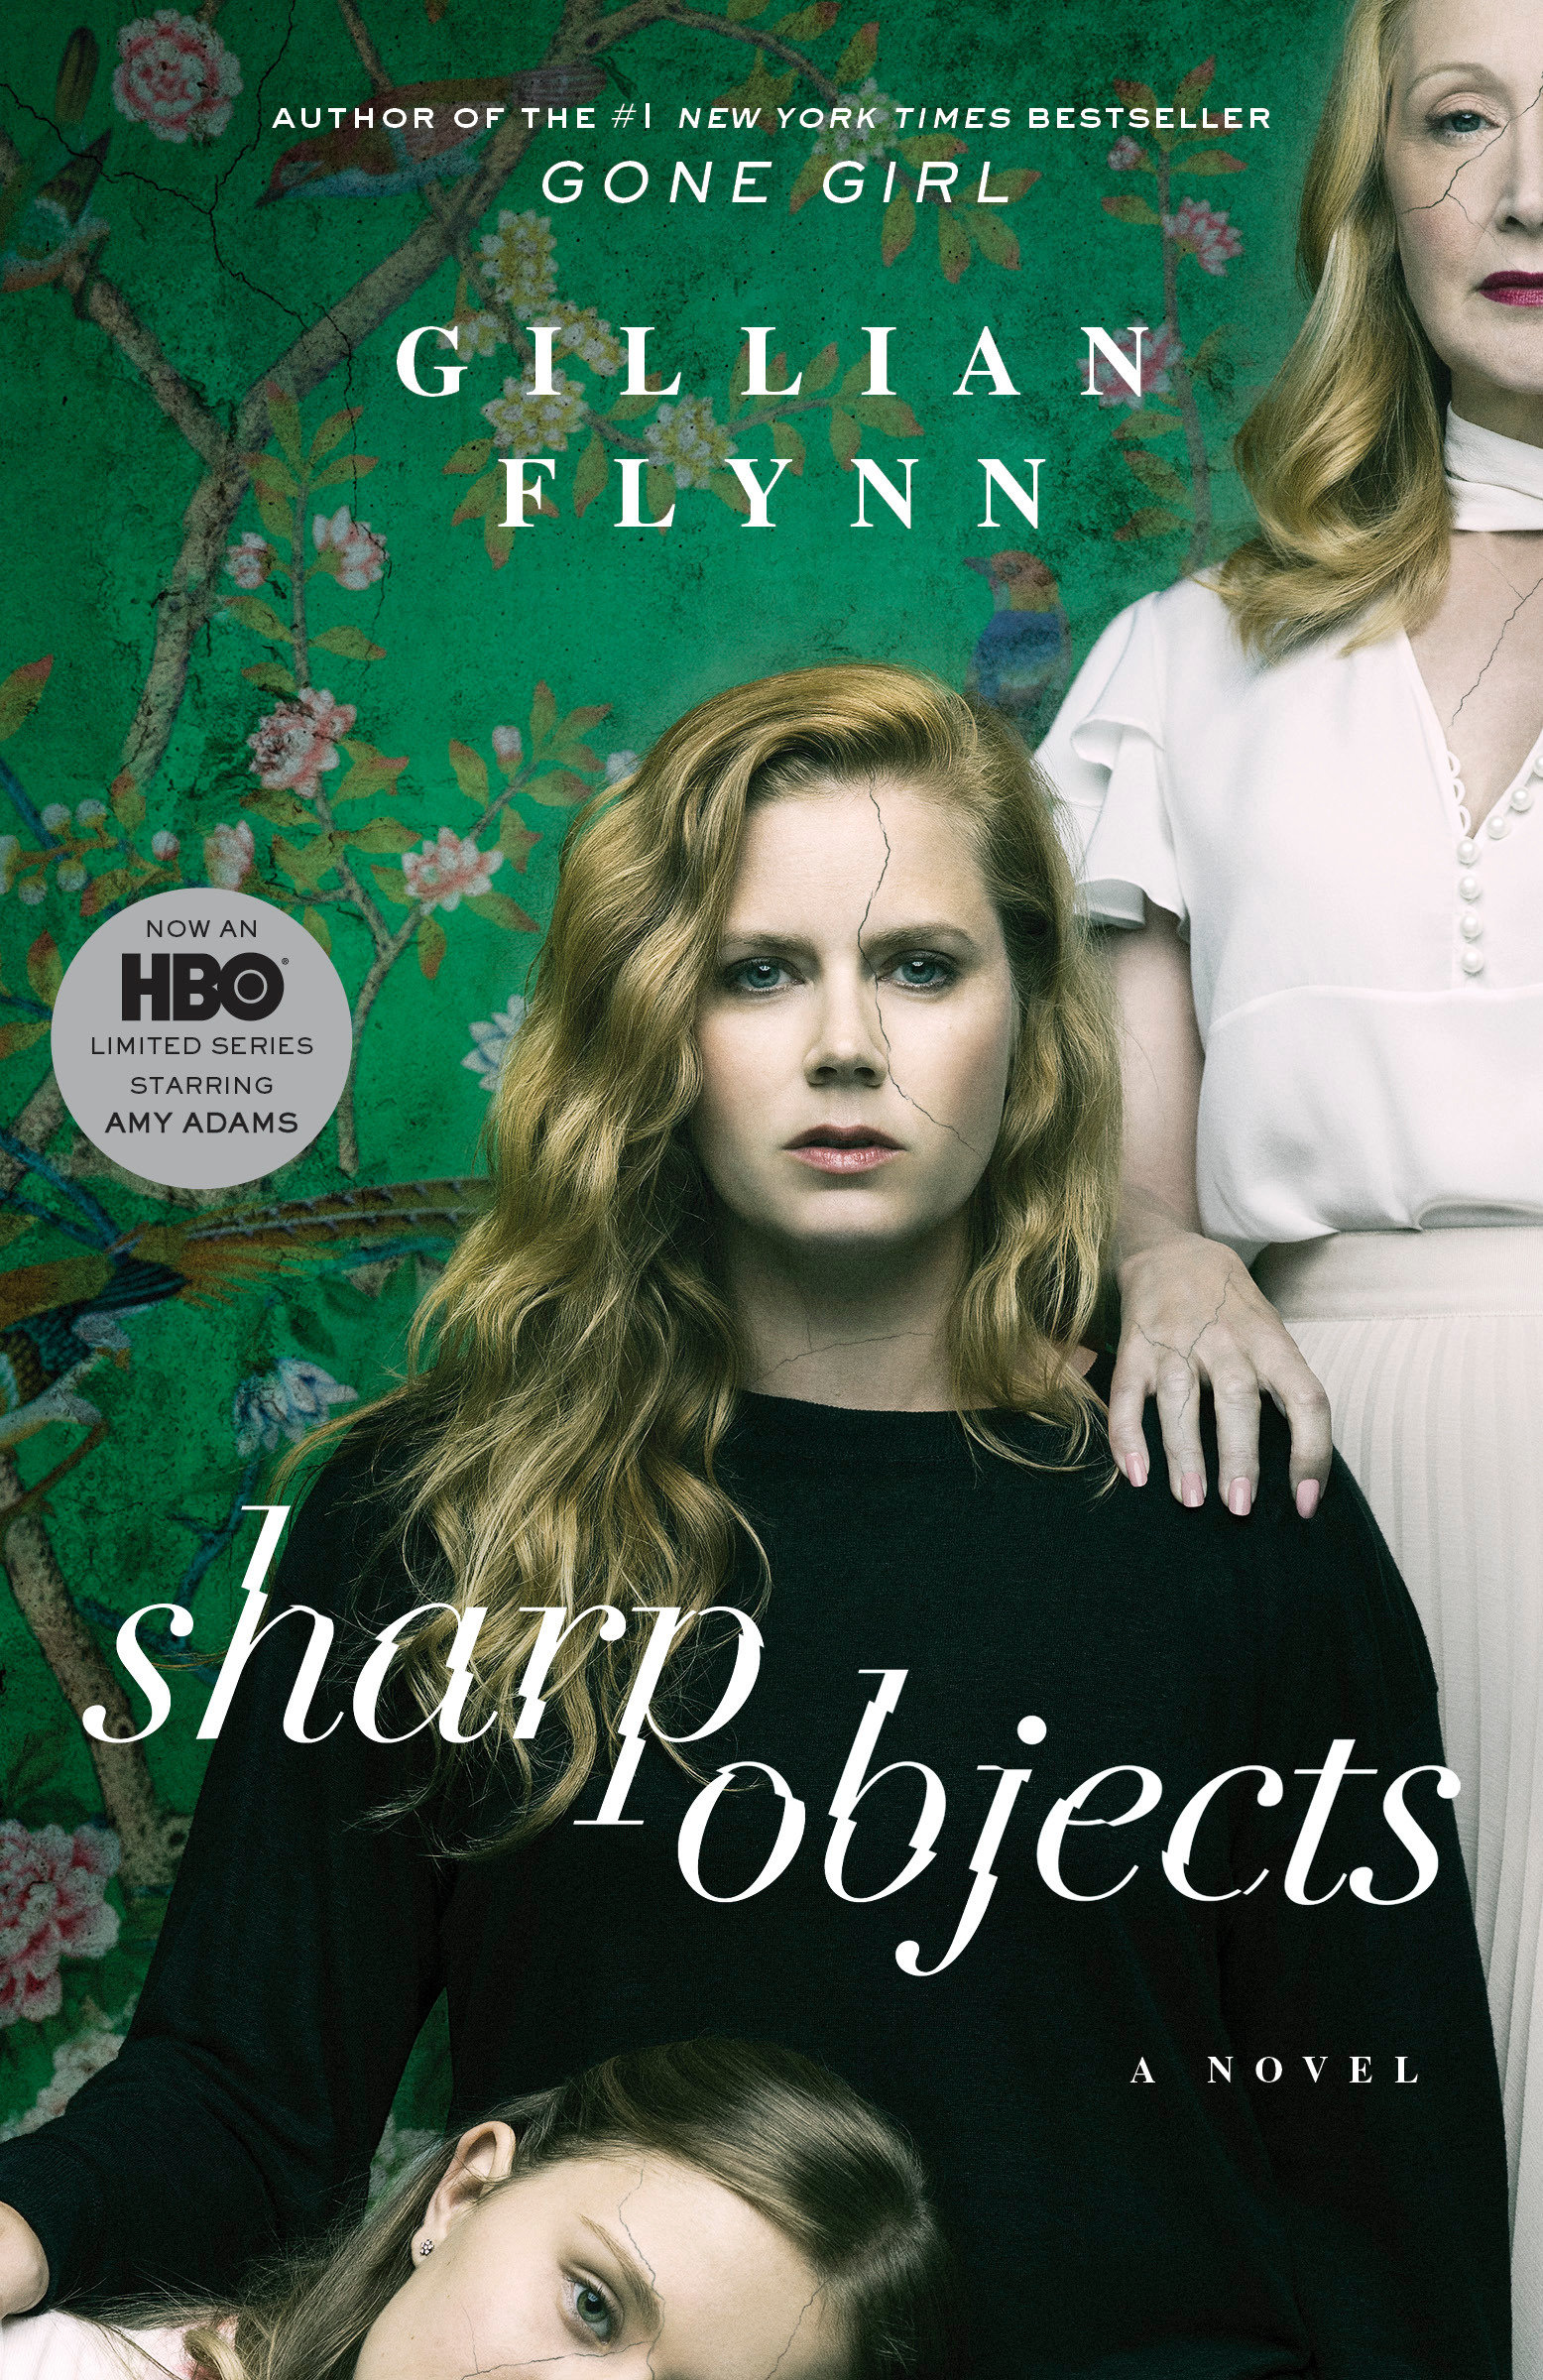 Sharp objects cover image